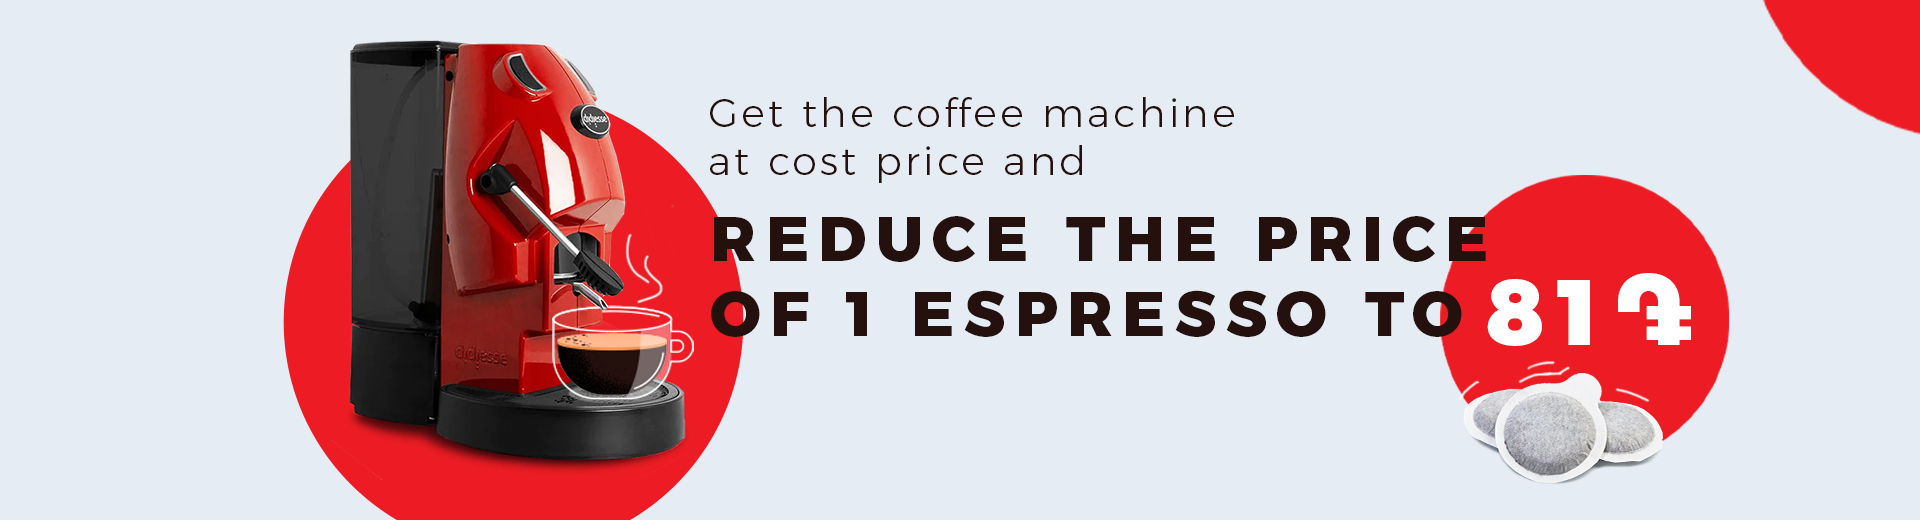 Get the coffe machine at cost price